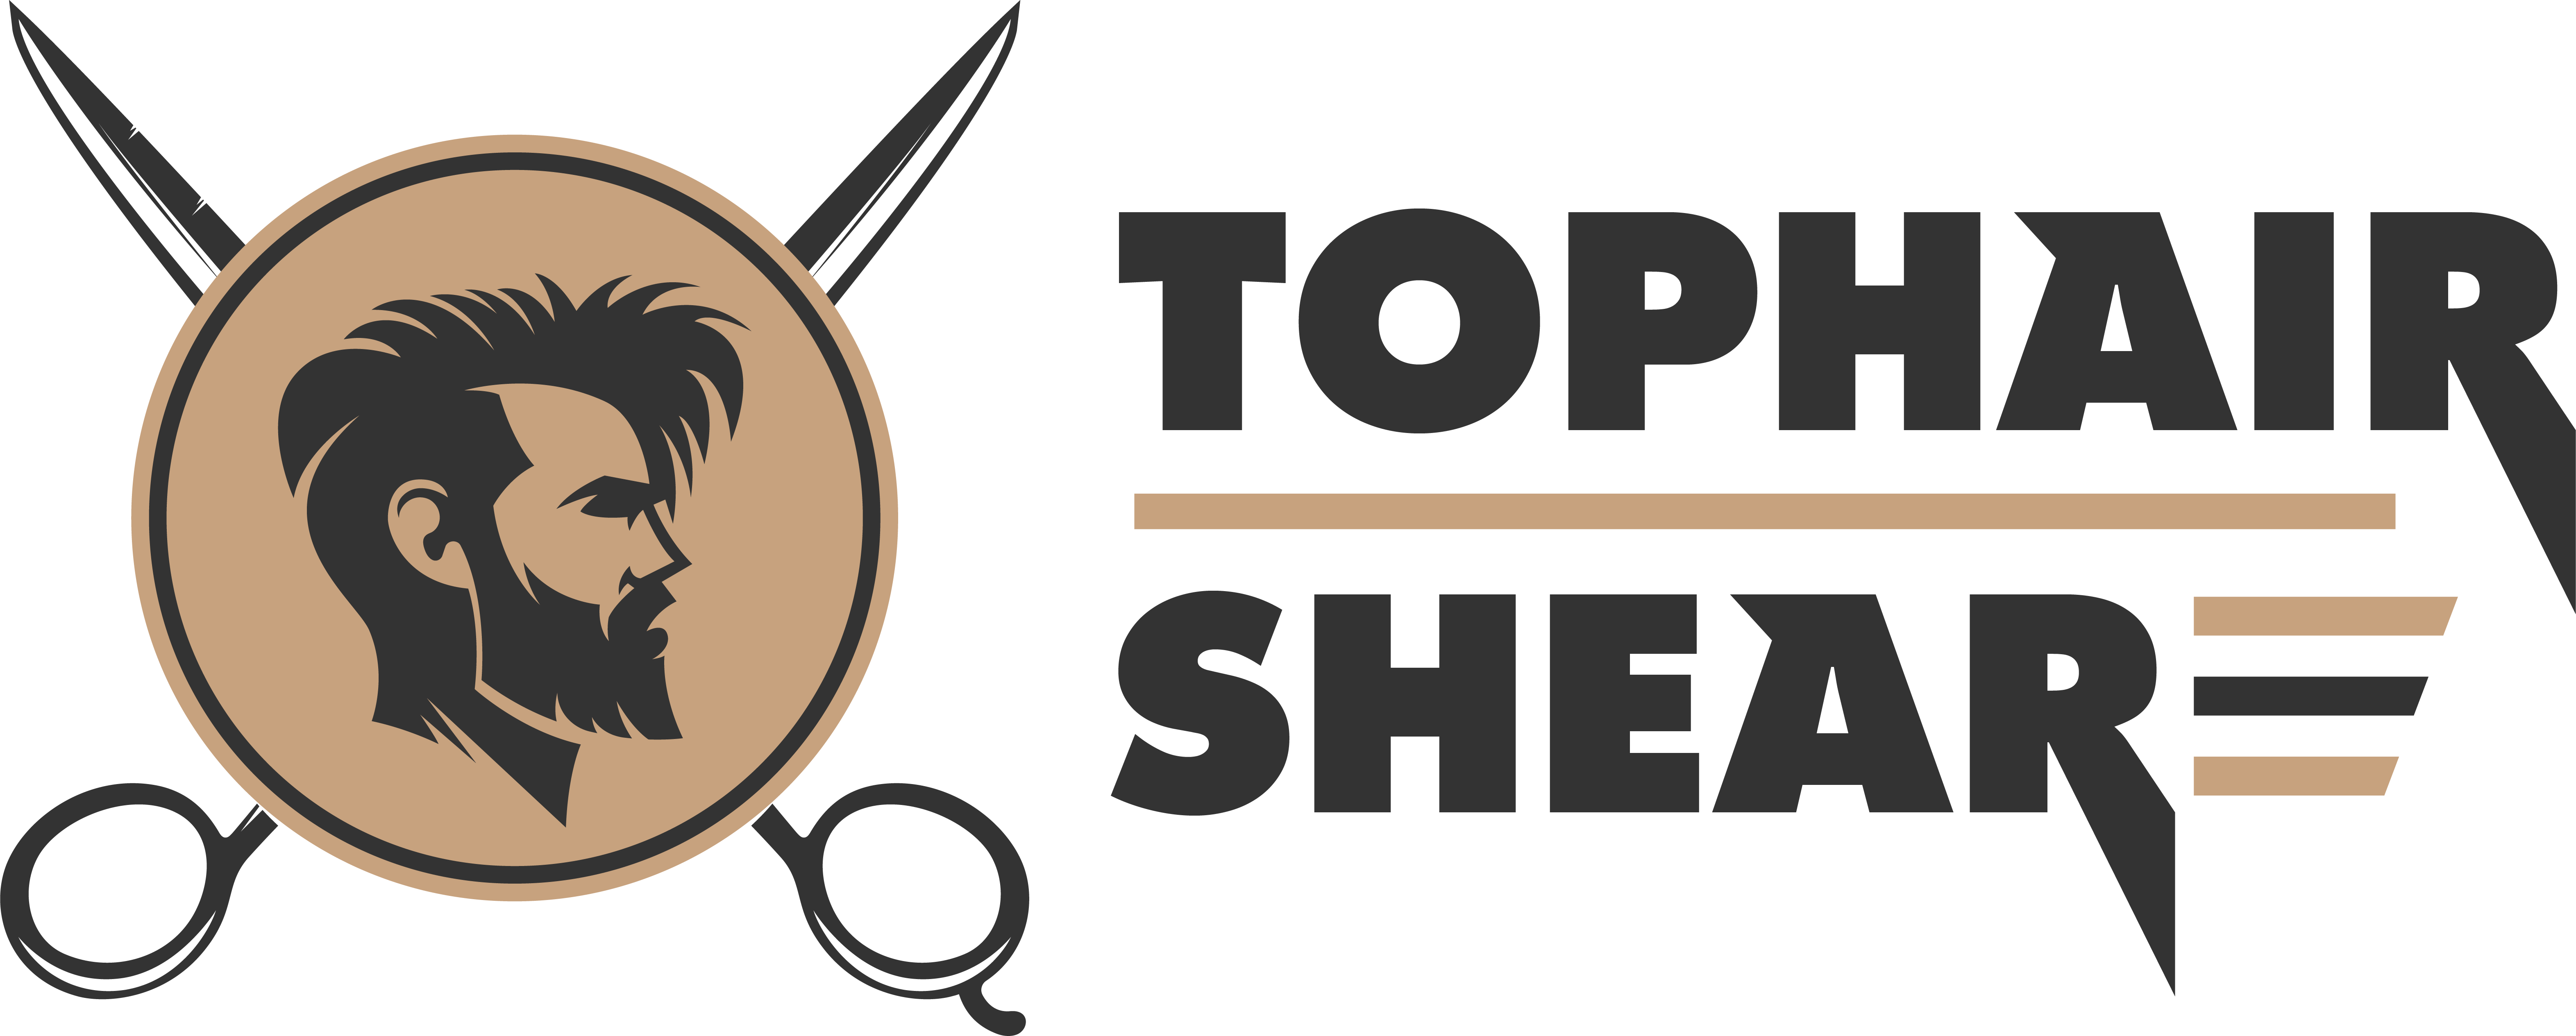 tophairshears.com